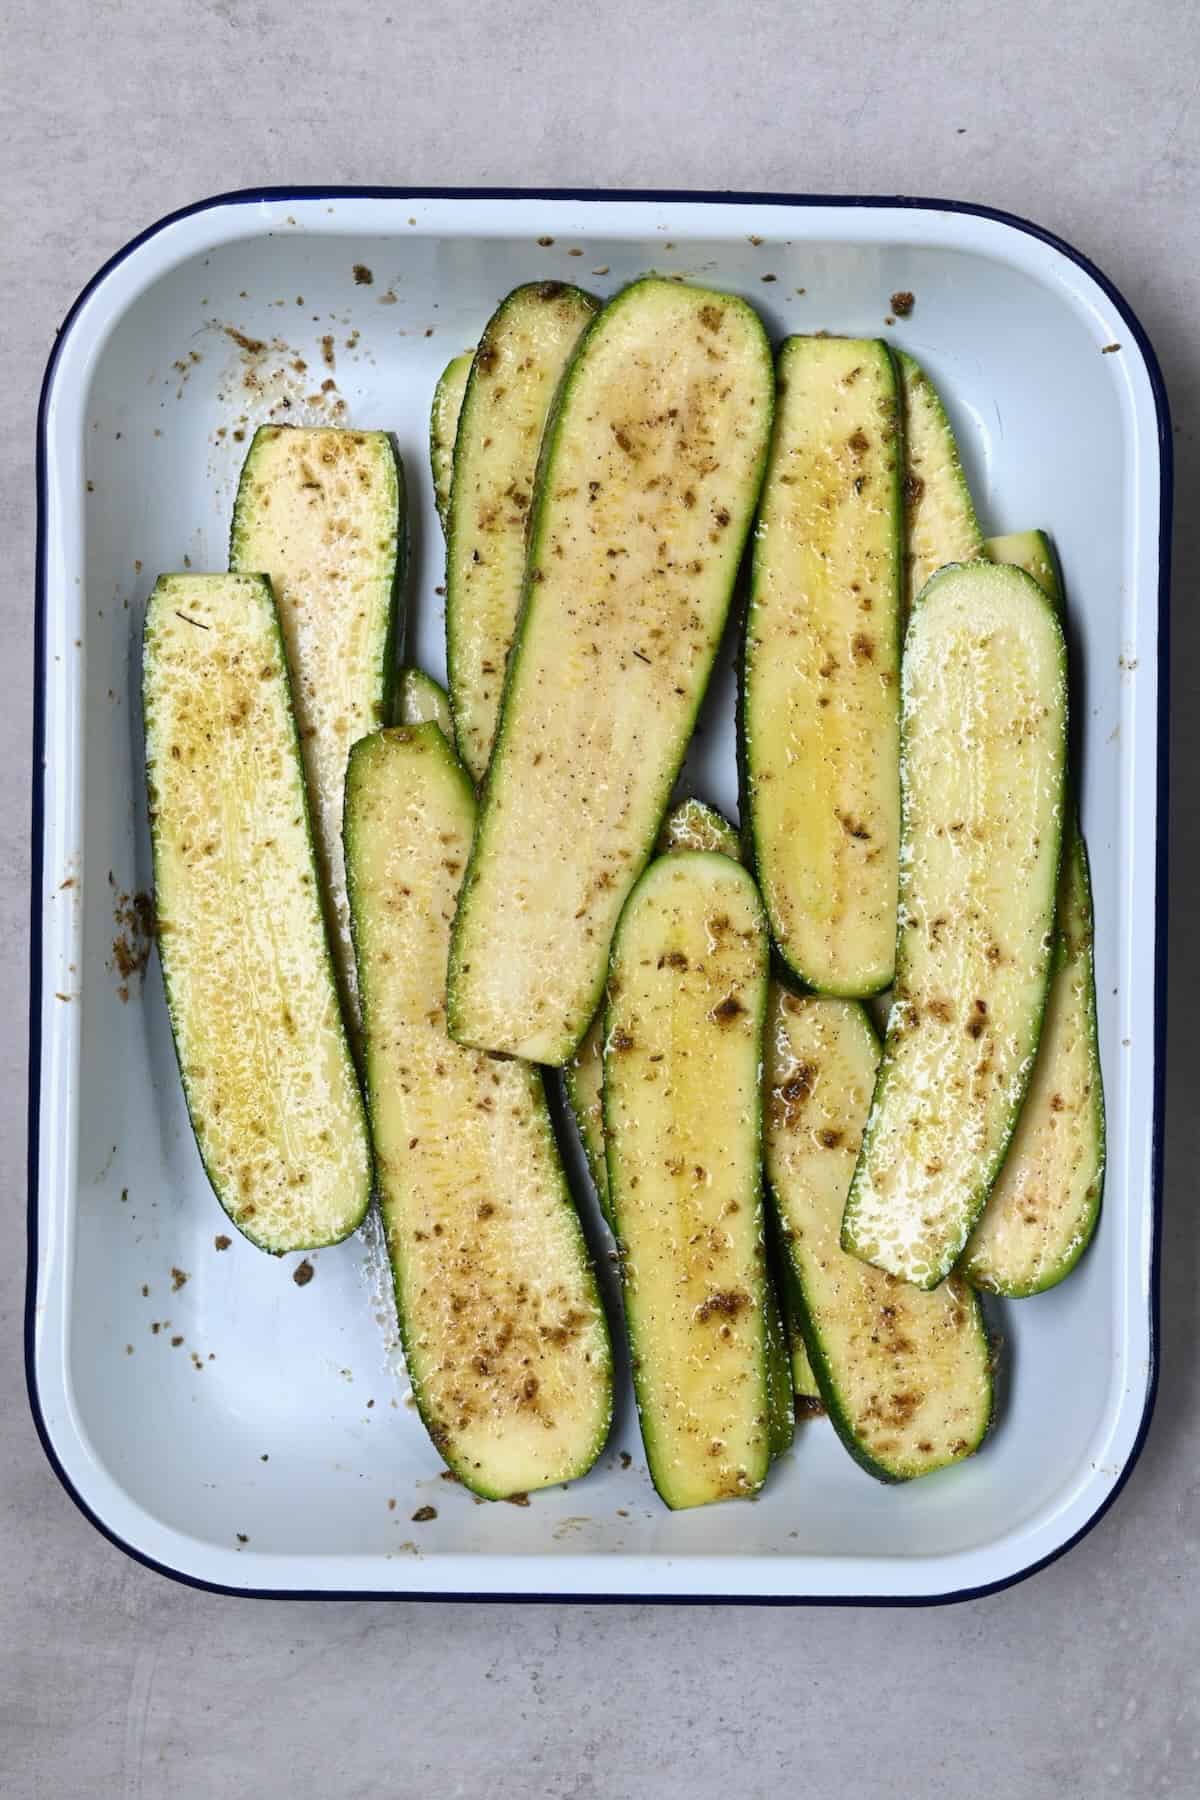 Zucchini slices tossed with oil